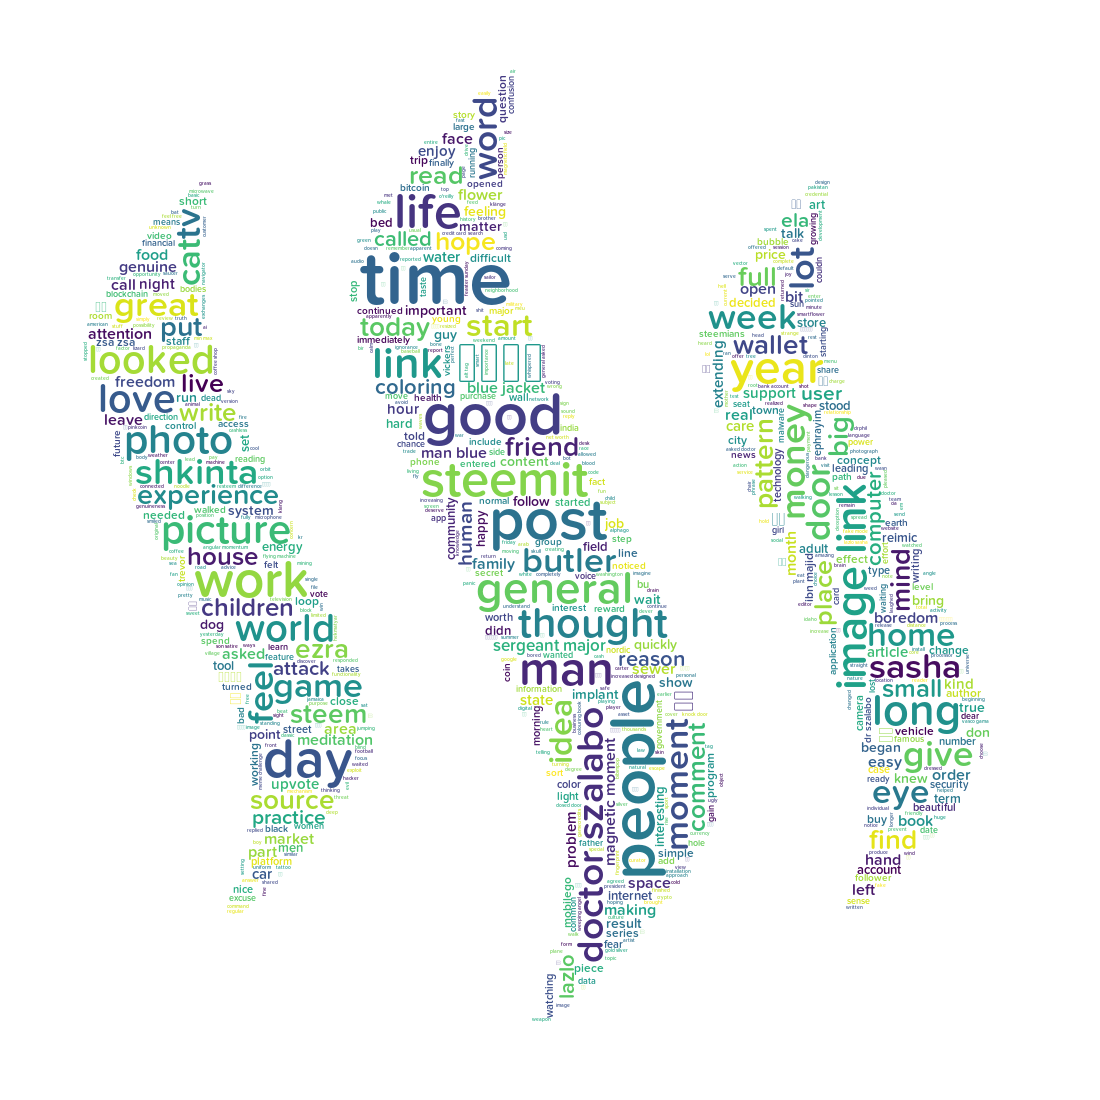 Steemit word cloud for April 21, 2017